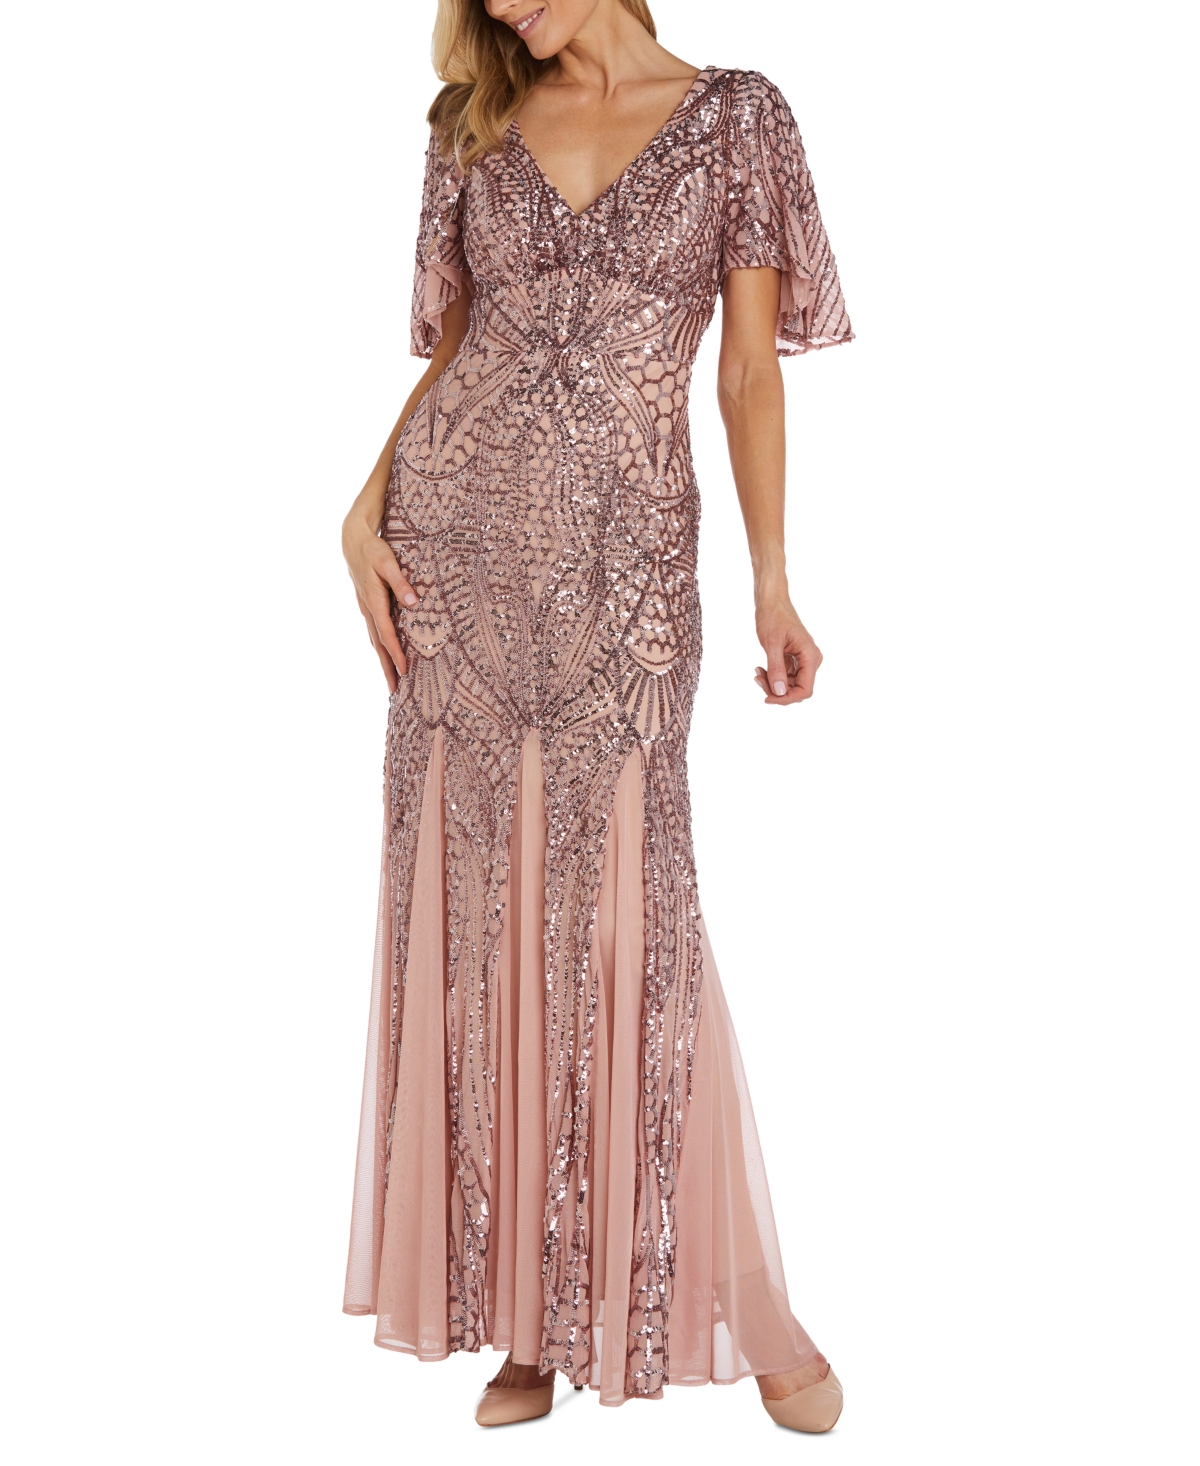 NIGHTWAY WOMEN'S LONG V-NECK SEQUINNED GOWN